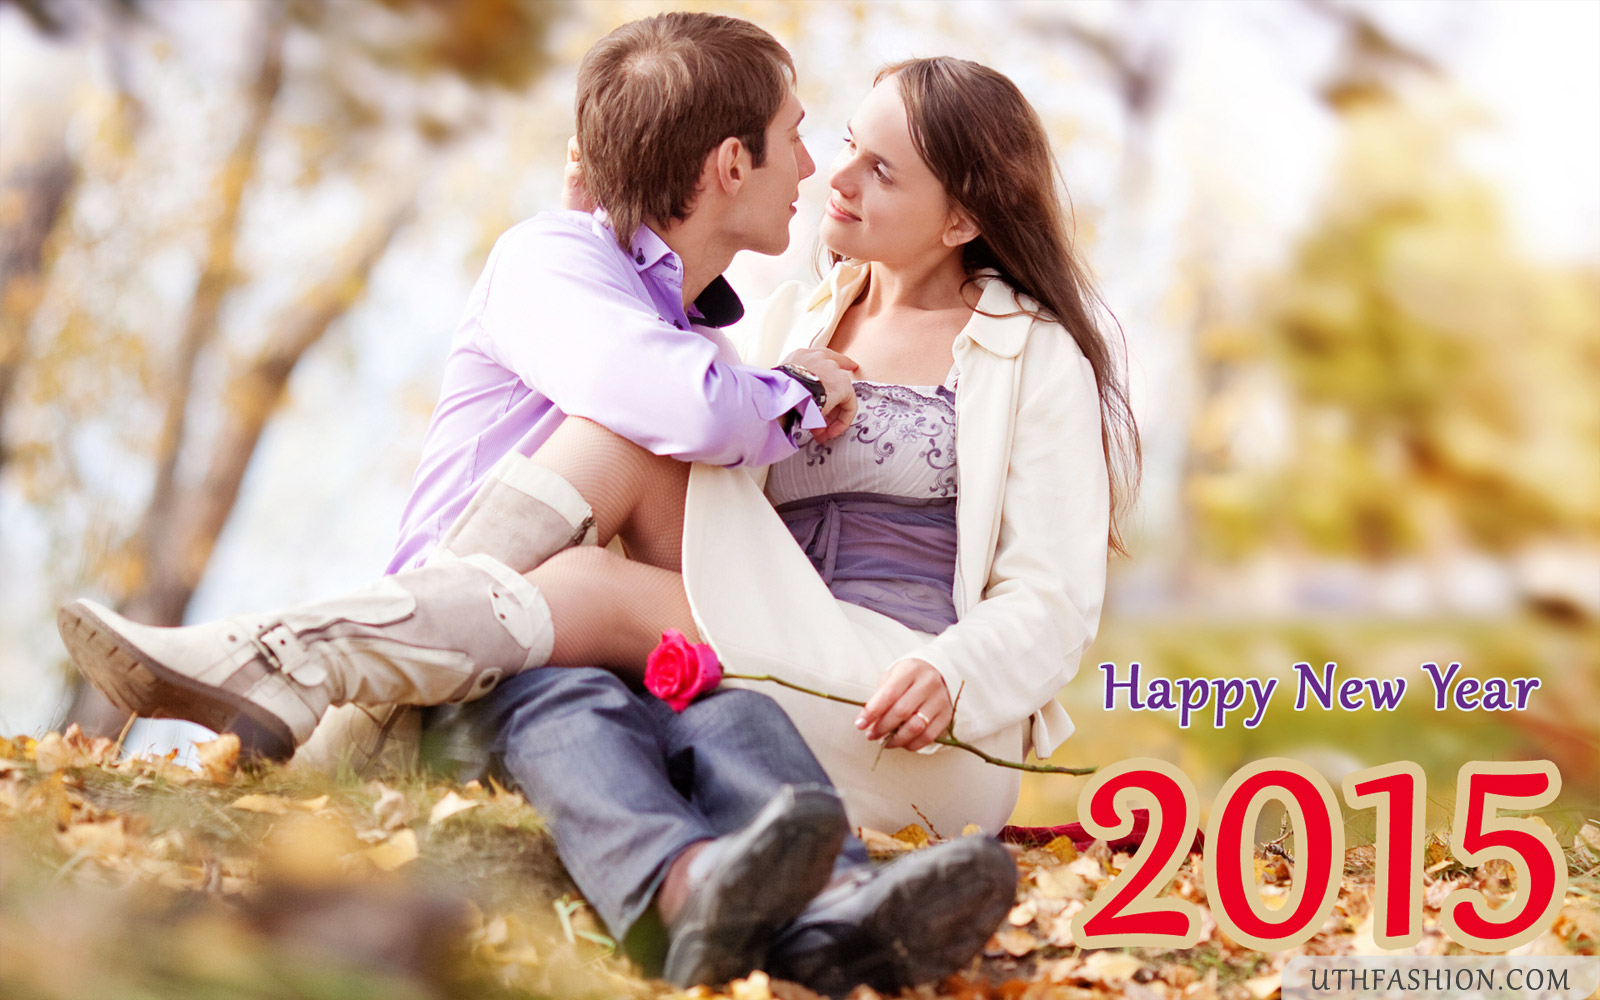 Happy New Year Wallpapers 2015 Free Download - HD Quality ...